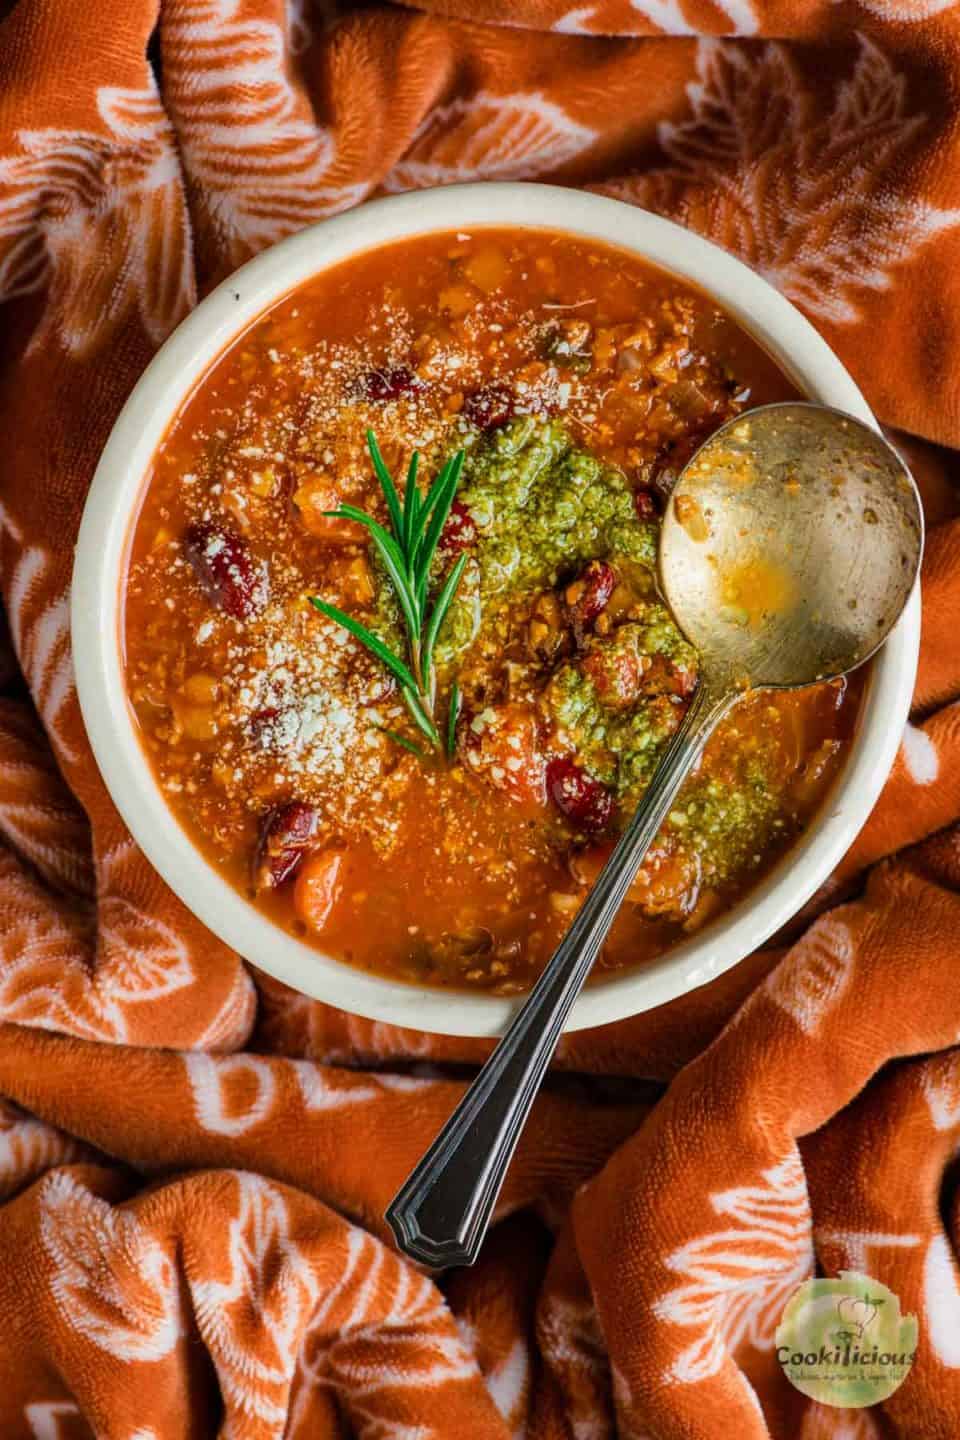 Italian chili served in a bowl with a spoon resting on top